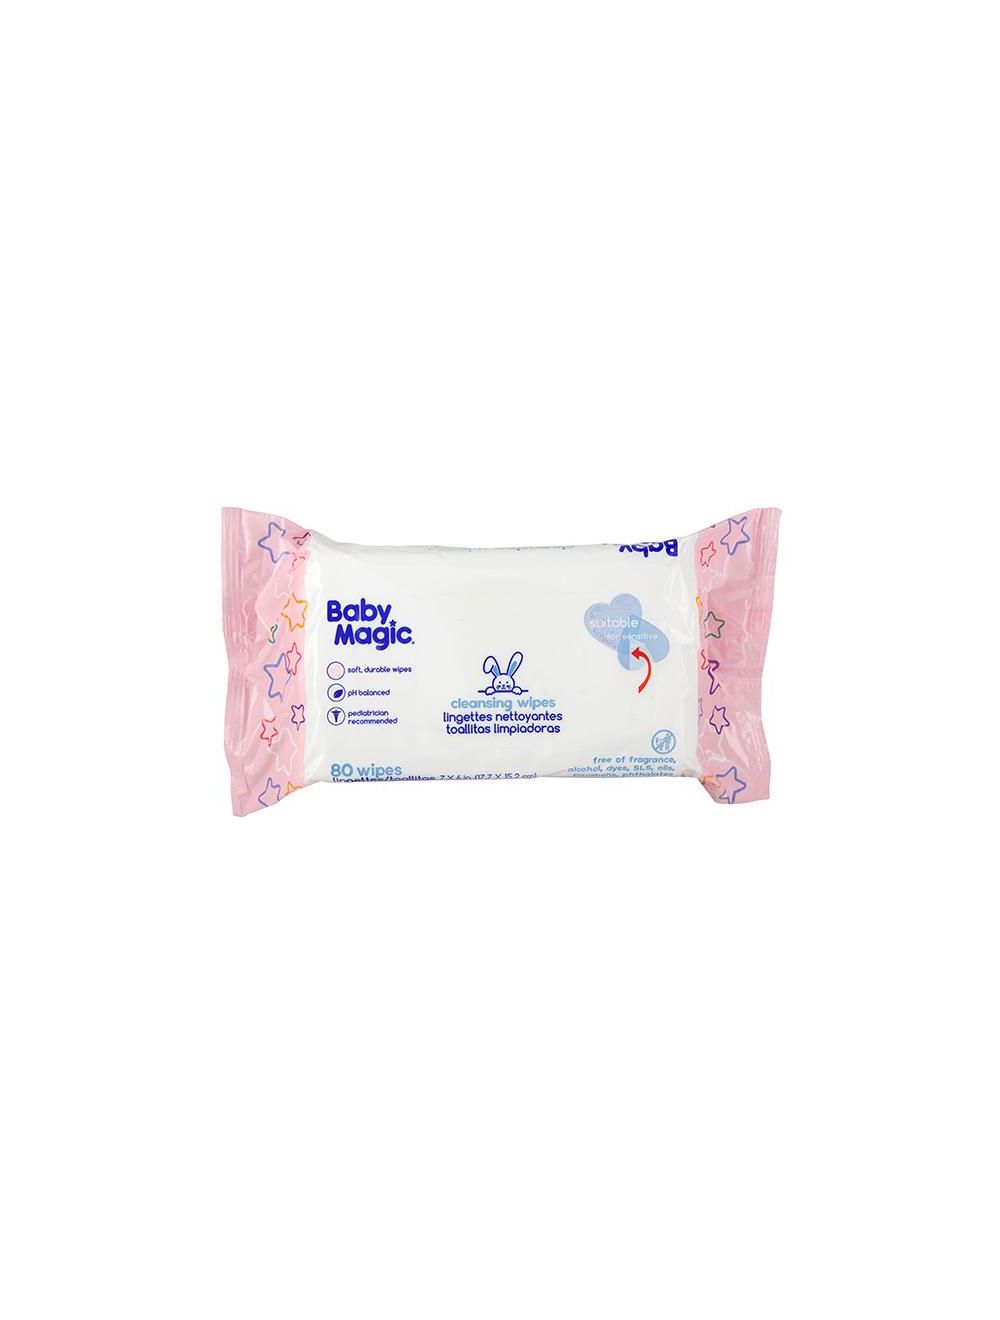 Baby Magic Magic Cleansing Baby Wipes